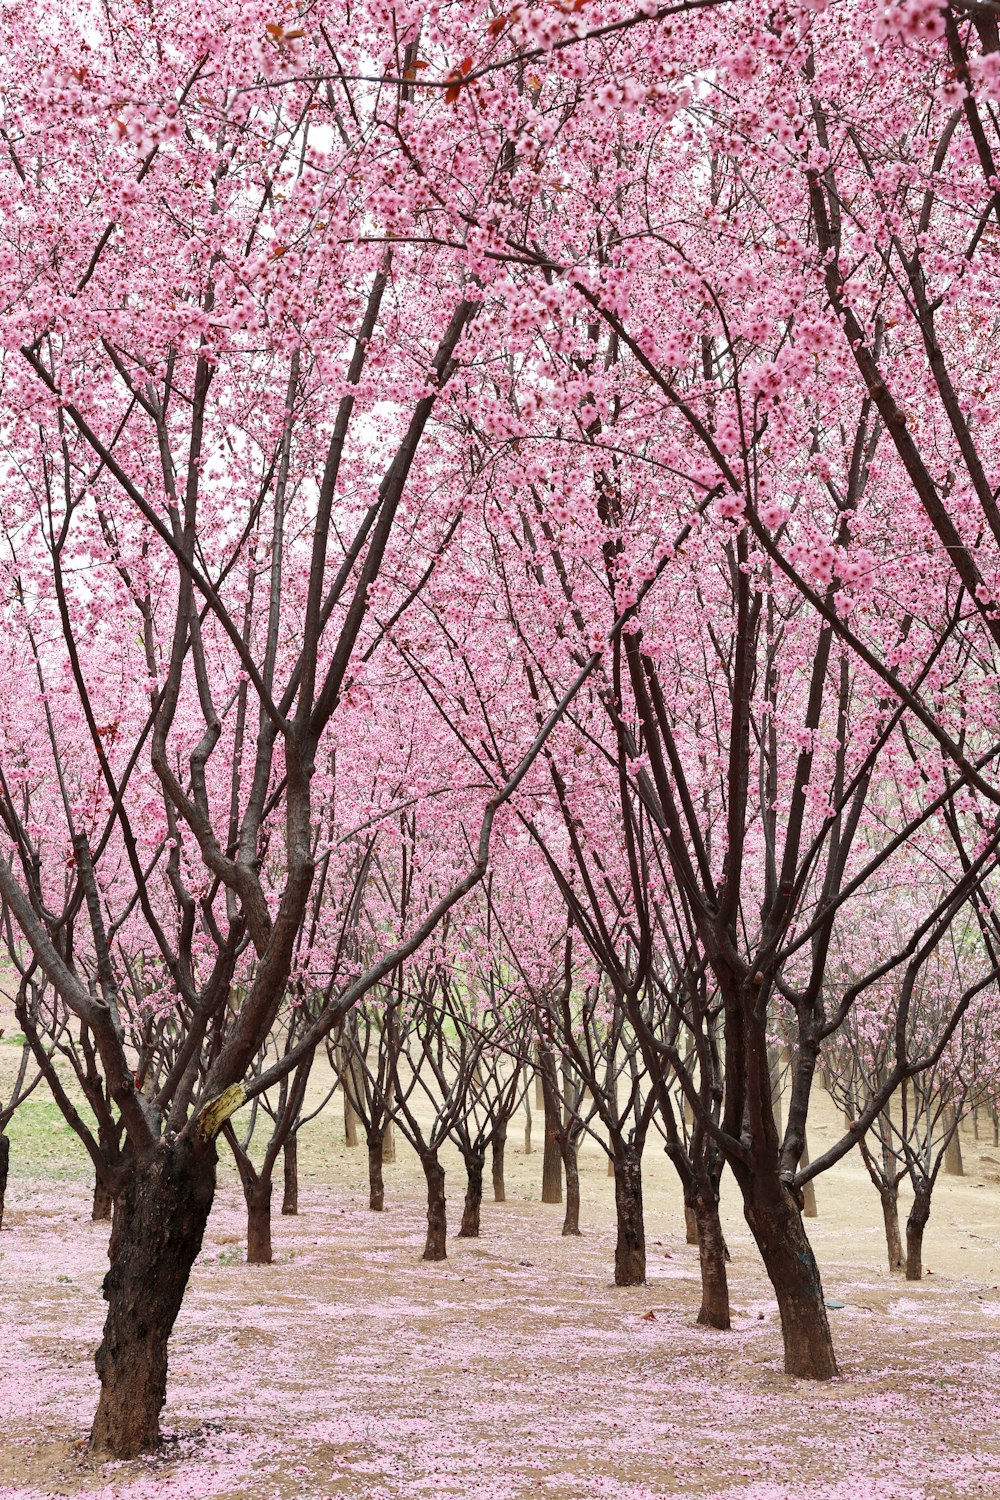 a field full of trees with pink flowers